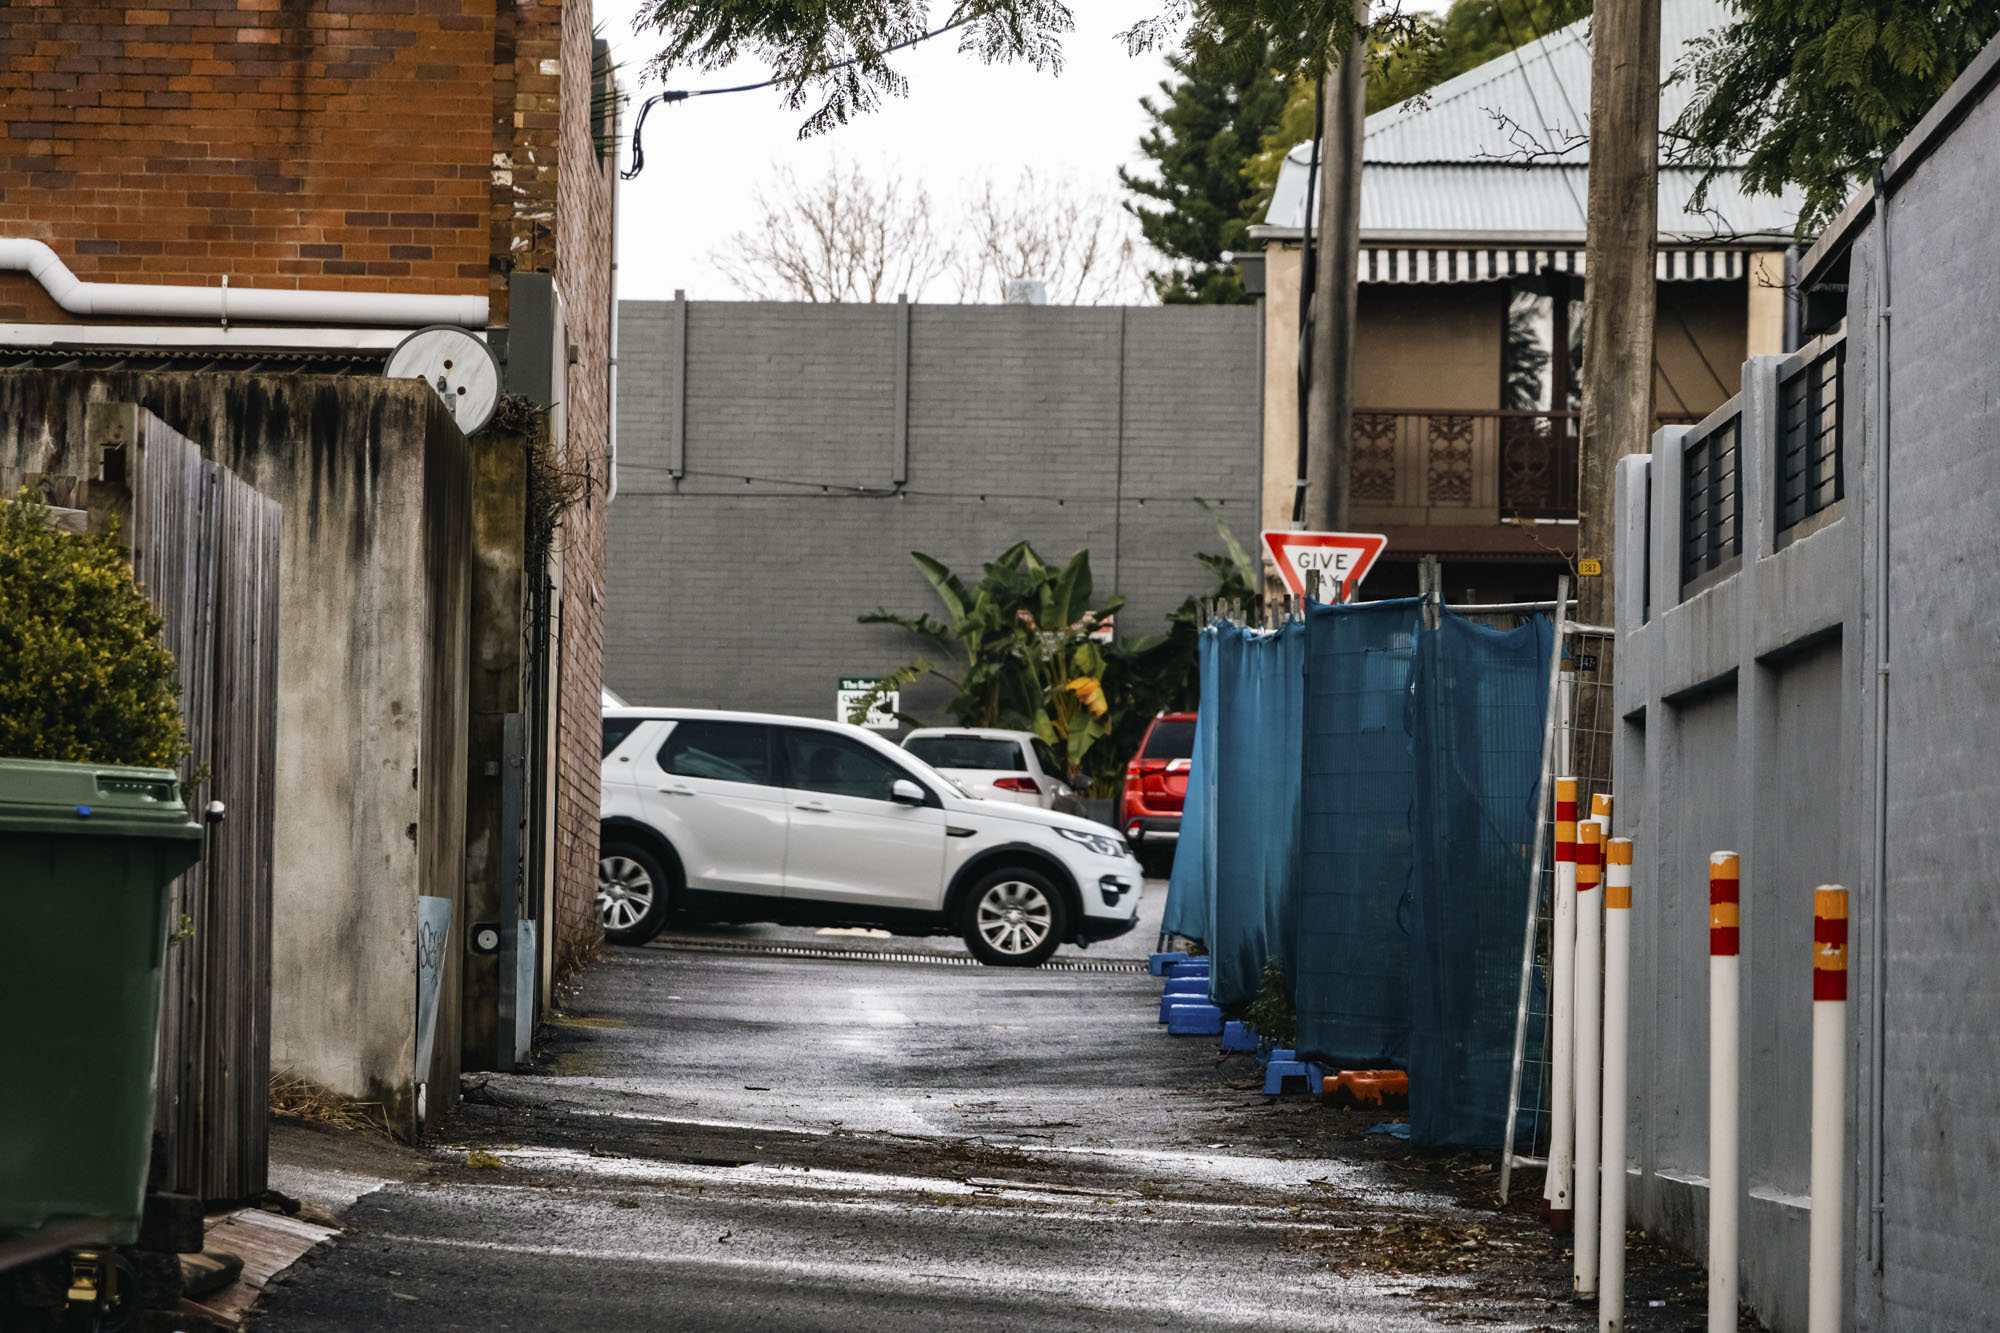 Image 8 of Photo Walk at Sydney Streets of Rozelle and Balmain